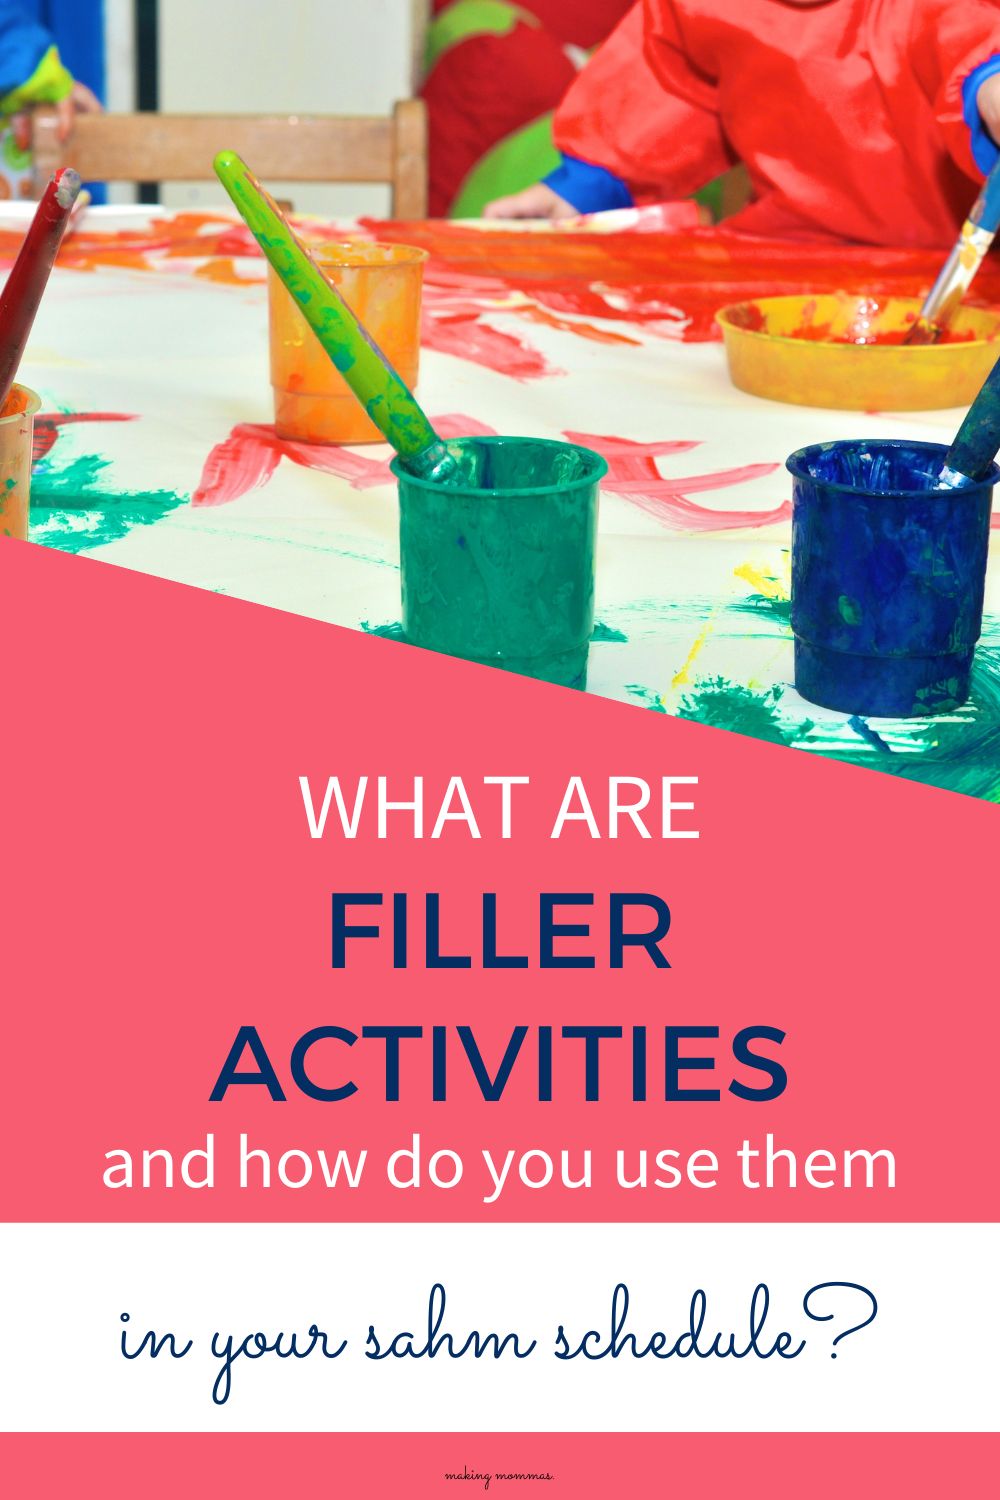 Pinterest pin image titled, "What are filler activities and how do you use them in your sahm schedule?" with kids painting